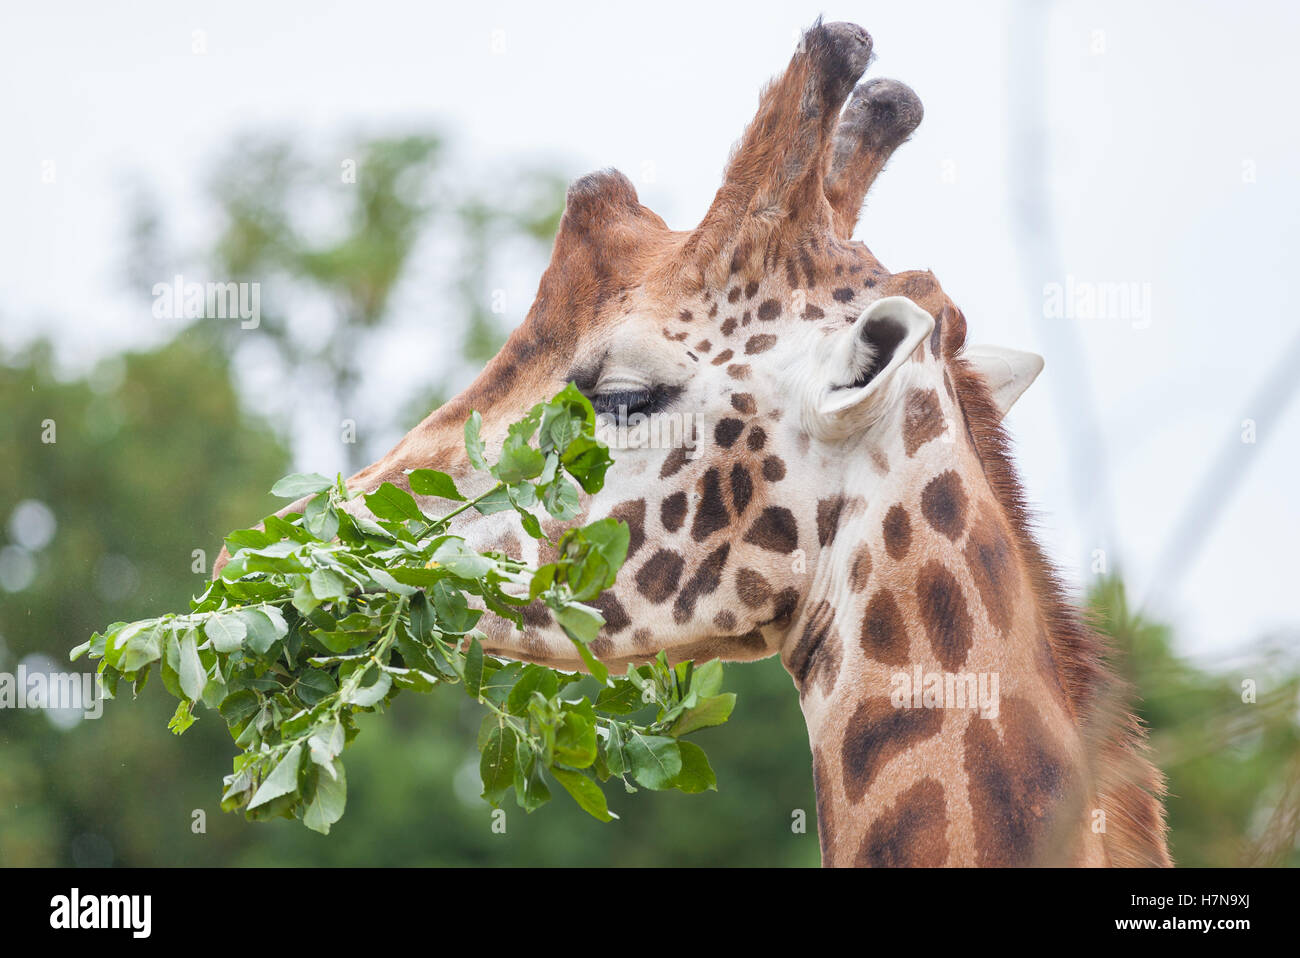 Giraffe eating a leaves from tree Stock Photo